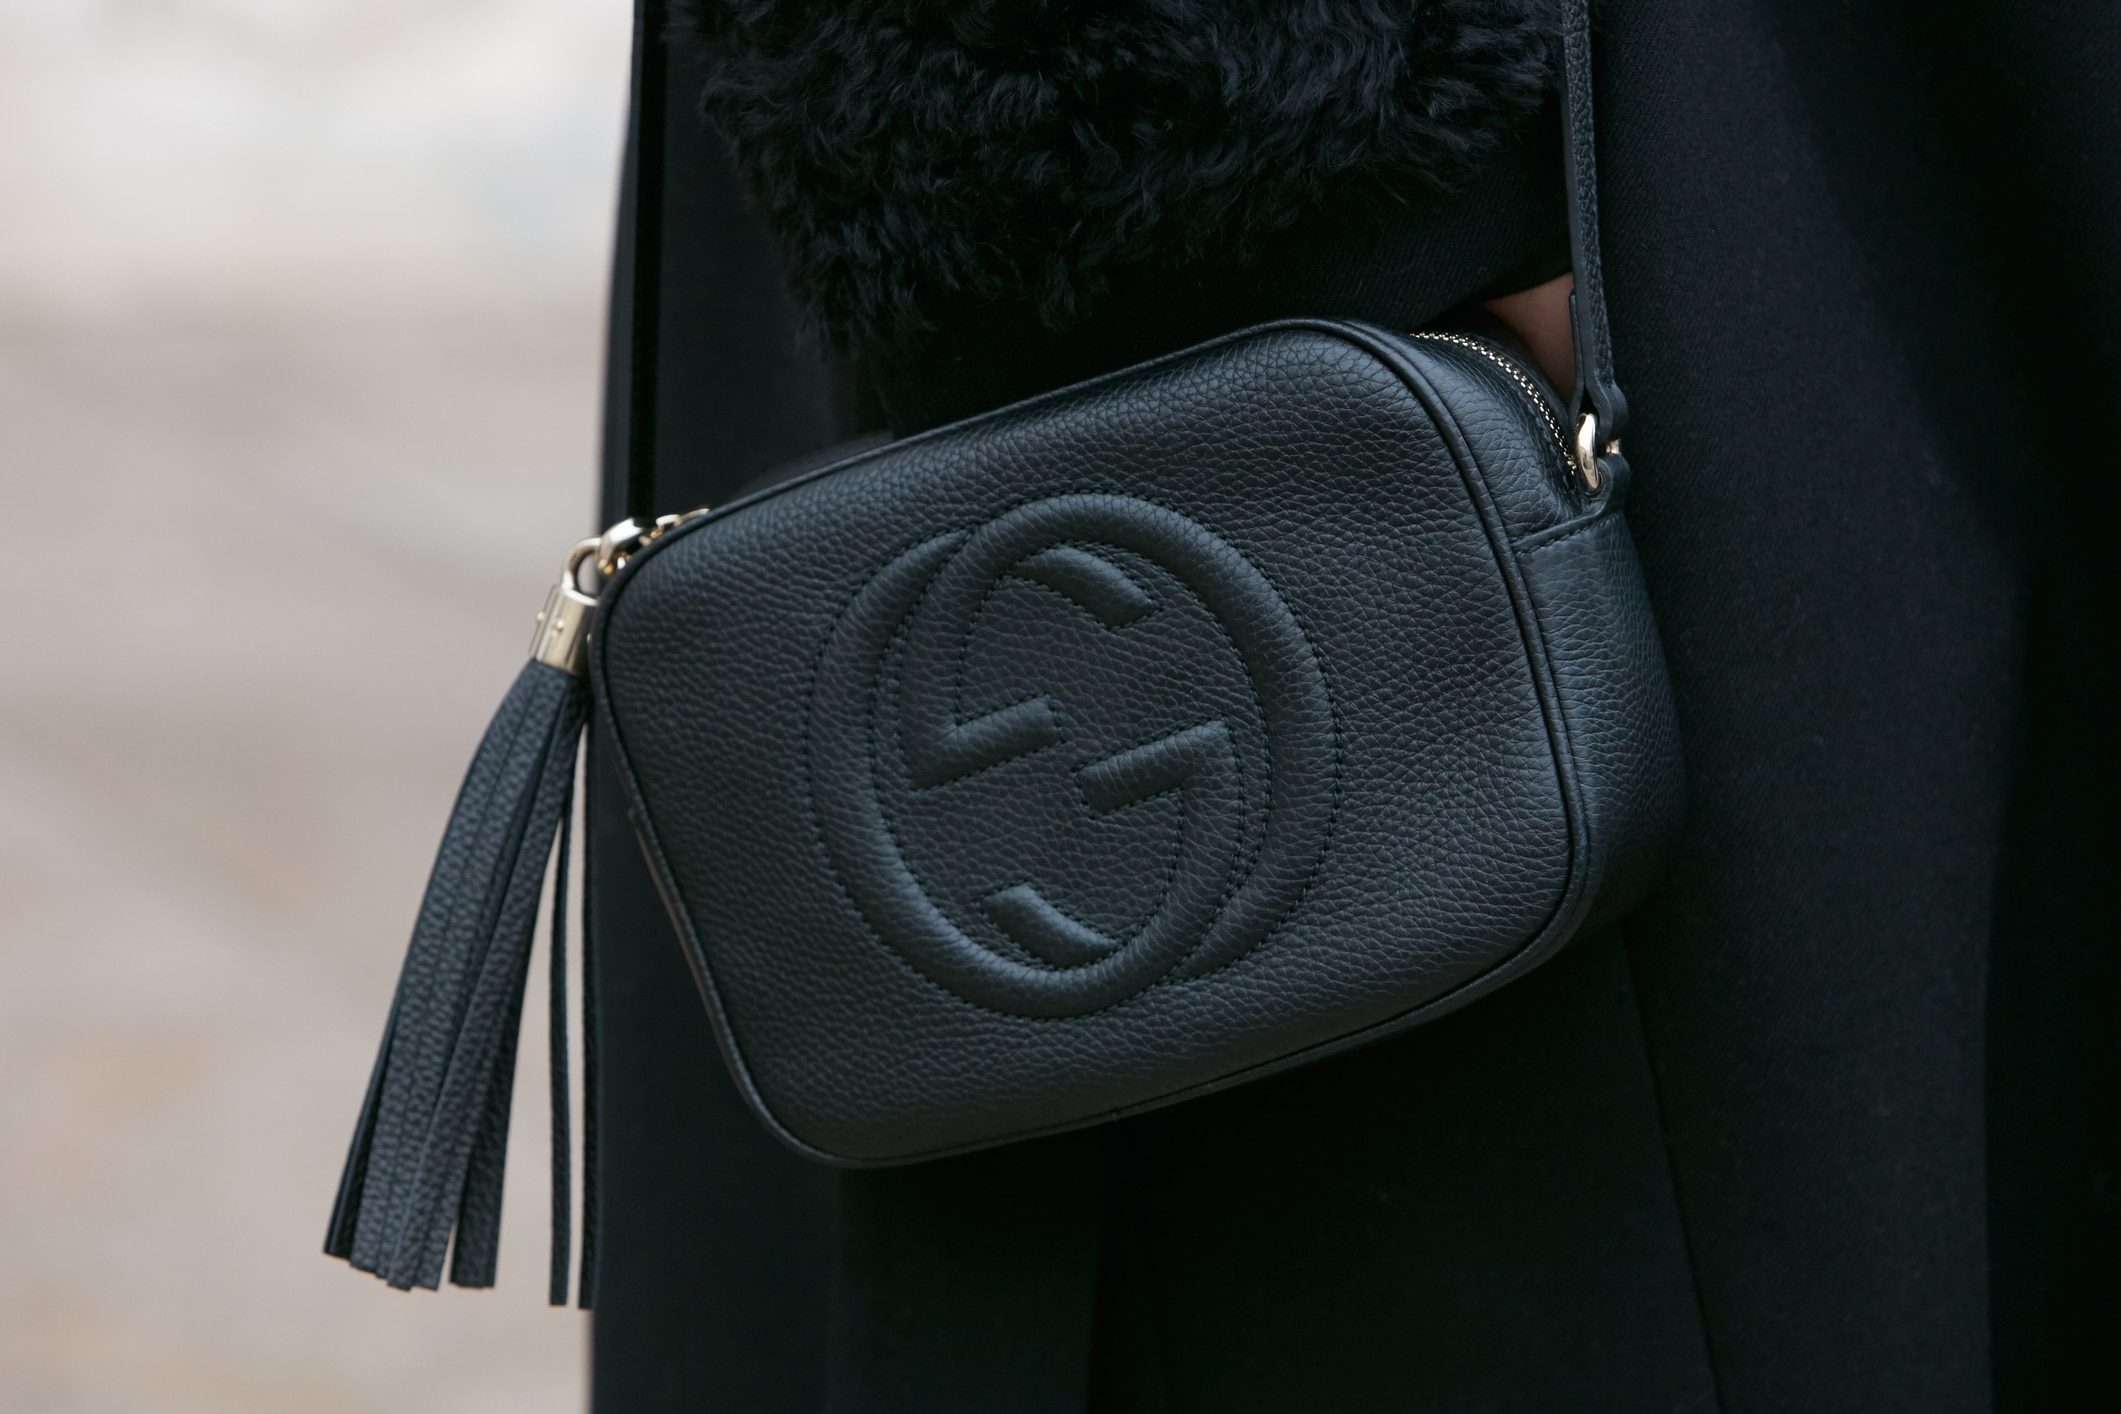 Best Designer Bags Under $1500 in 2023. The most underrated affordable luxury bags